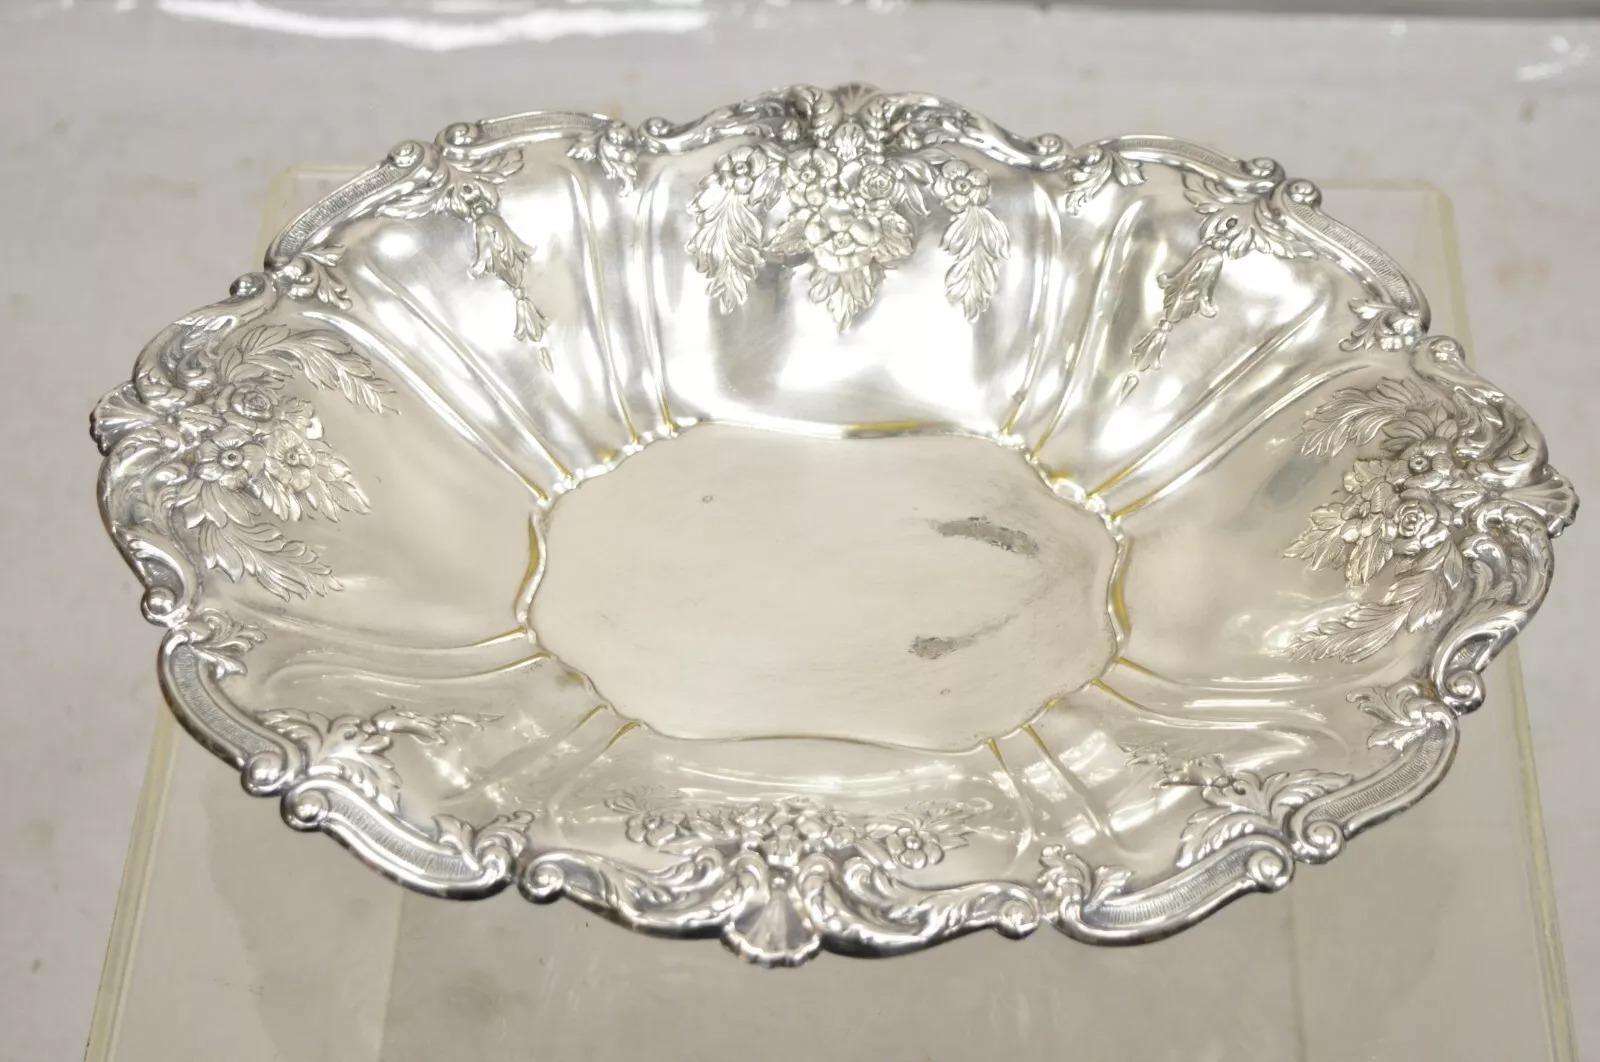 Vintage English Victorian Flower Rose Repousse Silver Plated Footed Oval Dish. CIRCA Anfang bis Mitte des 20. Jahrhunderts. Abmessungen:  4